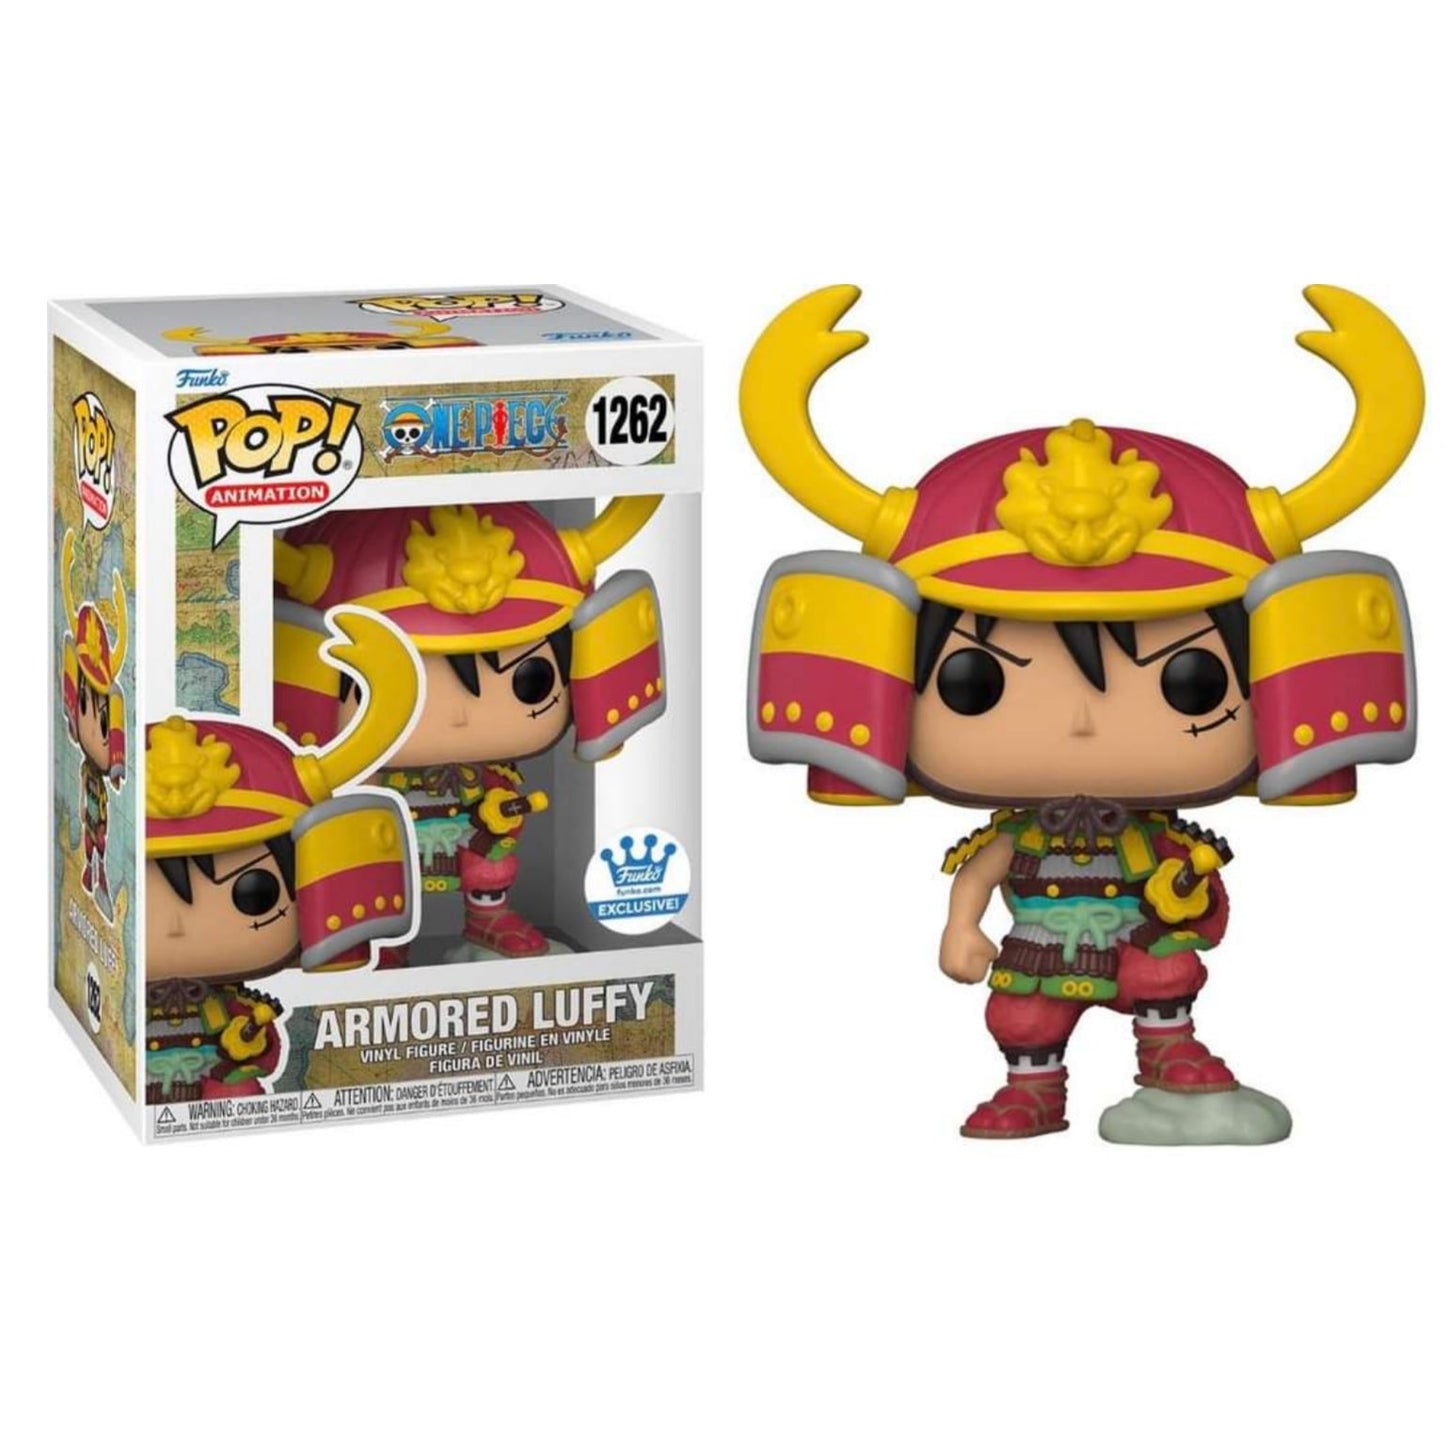 On Hand Armored Luffy Funko Shop Exclusive Funko Pop!